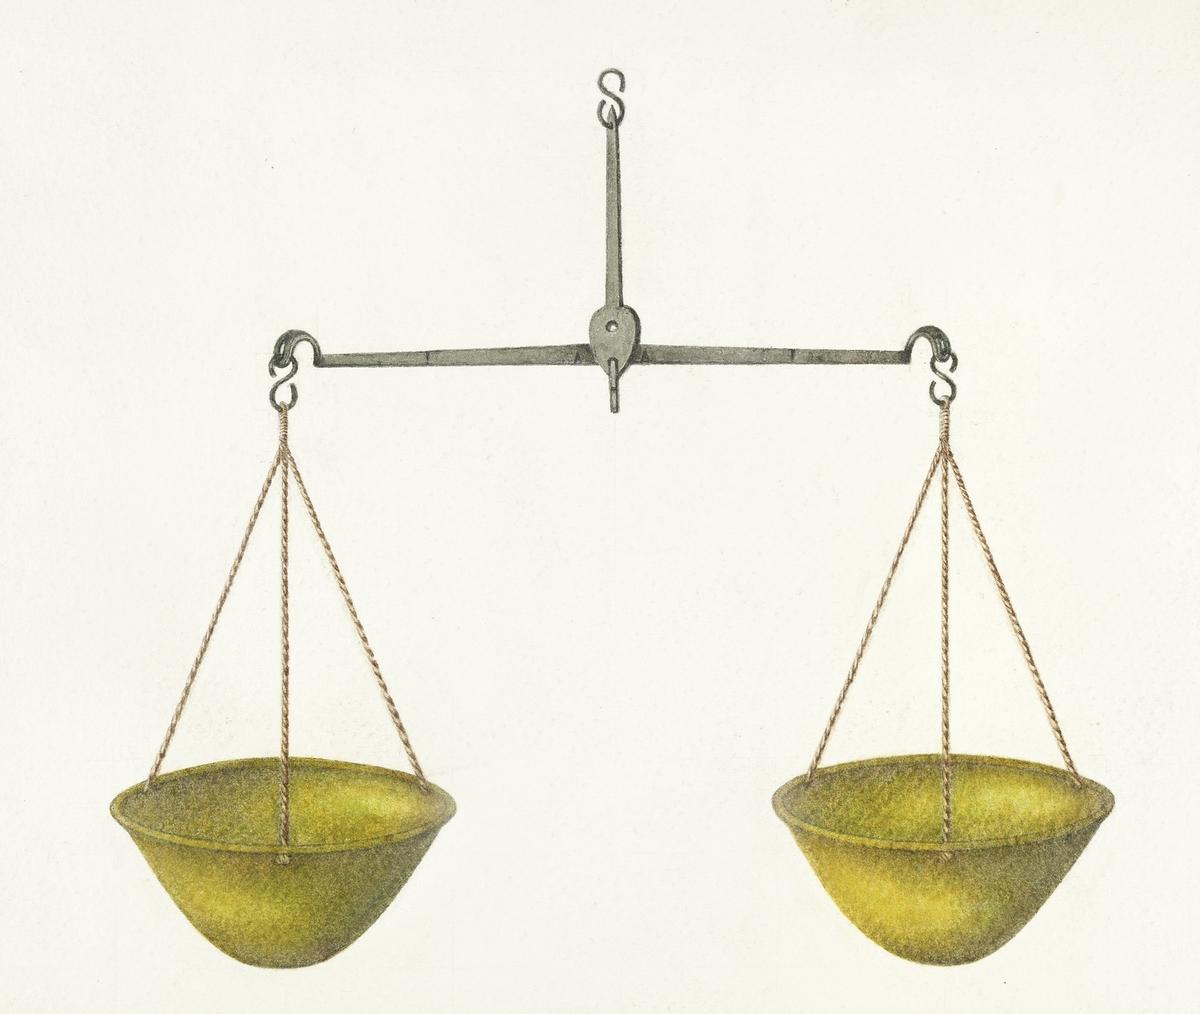 An illustration of a basket scale